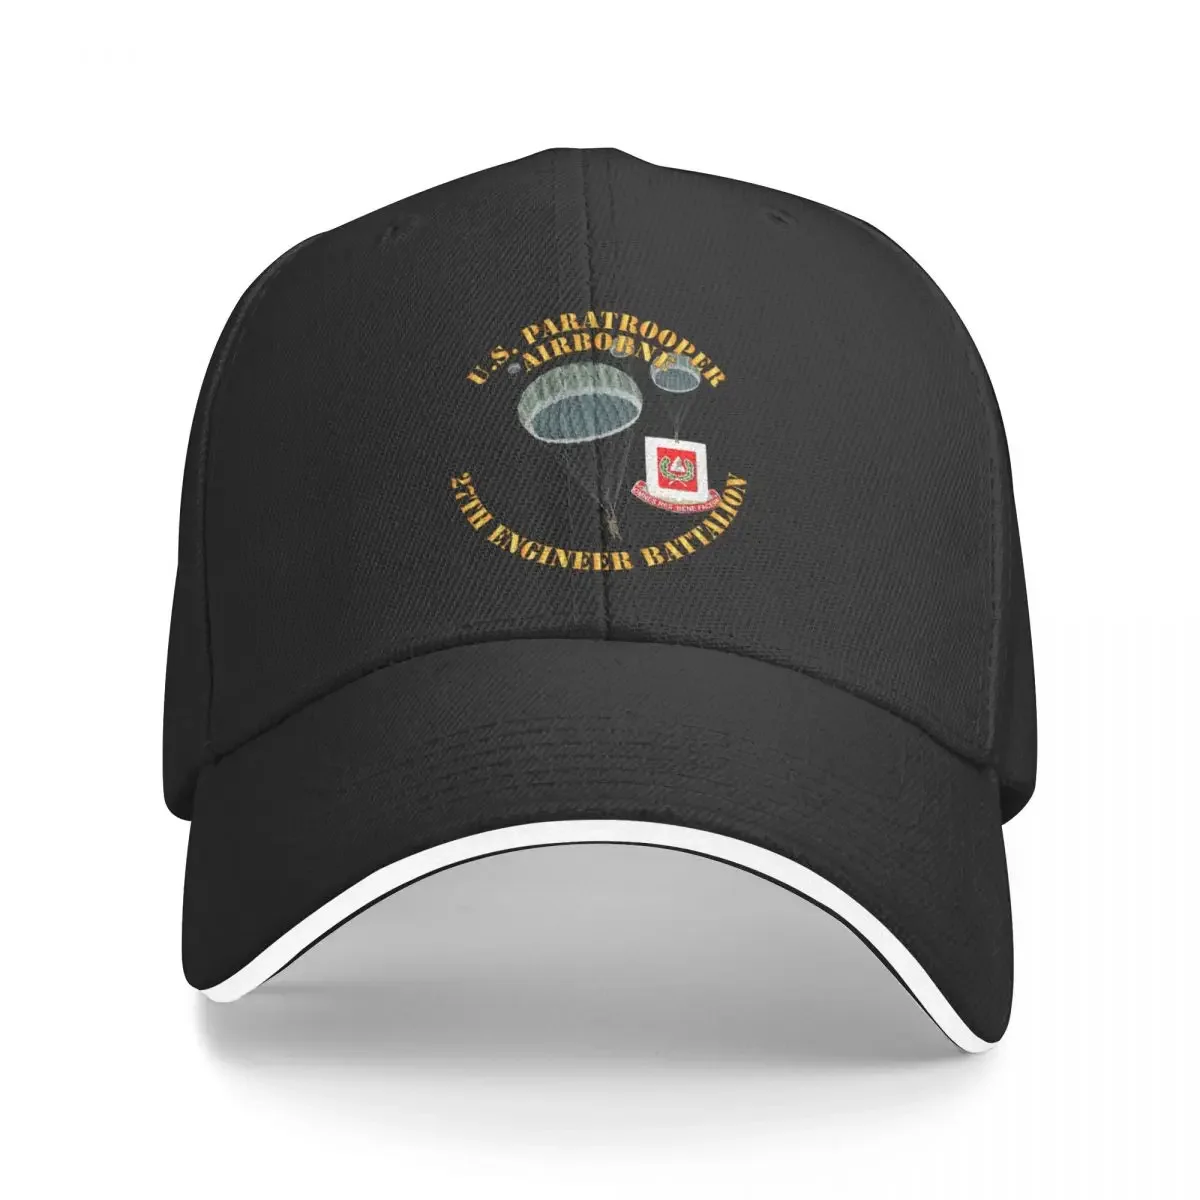 

Army - United States Paratrooper - 27th Engineer Battalion Baseball Cap cute Big Size Hat Male Women's